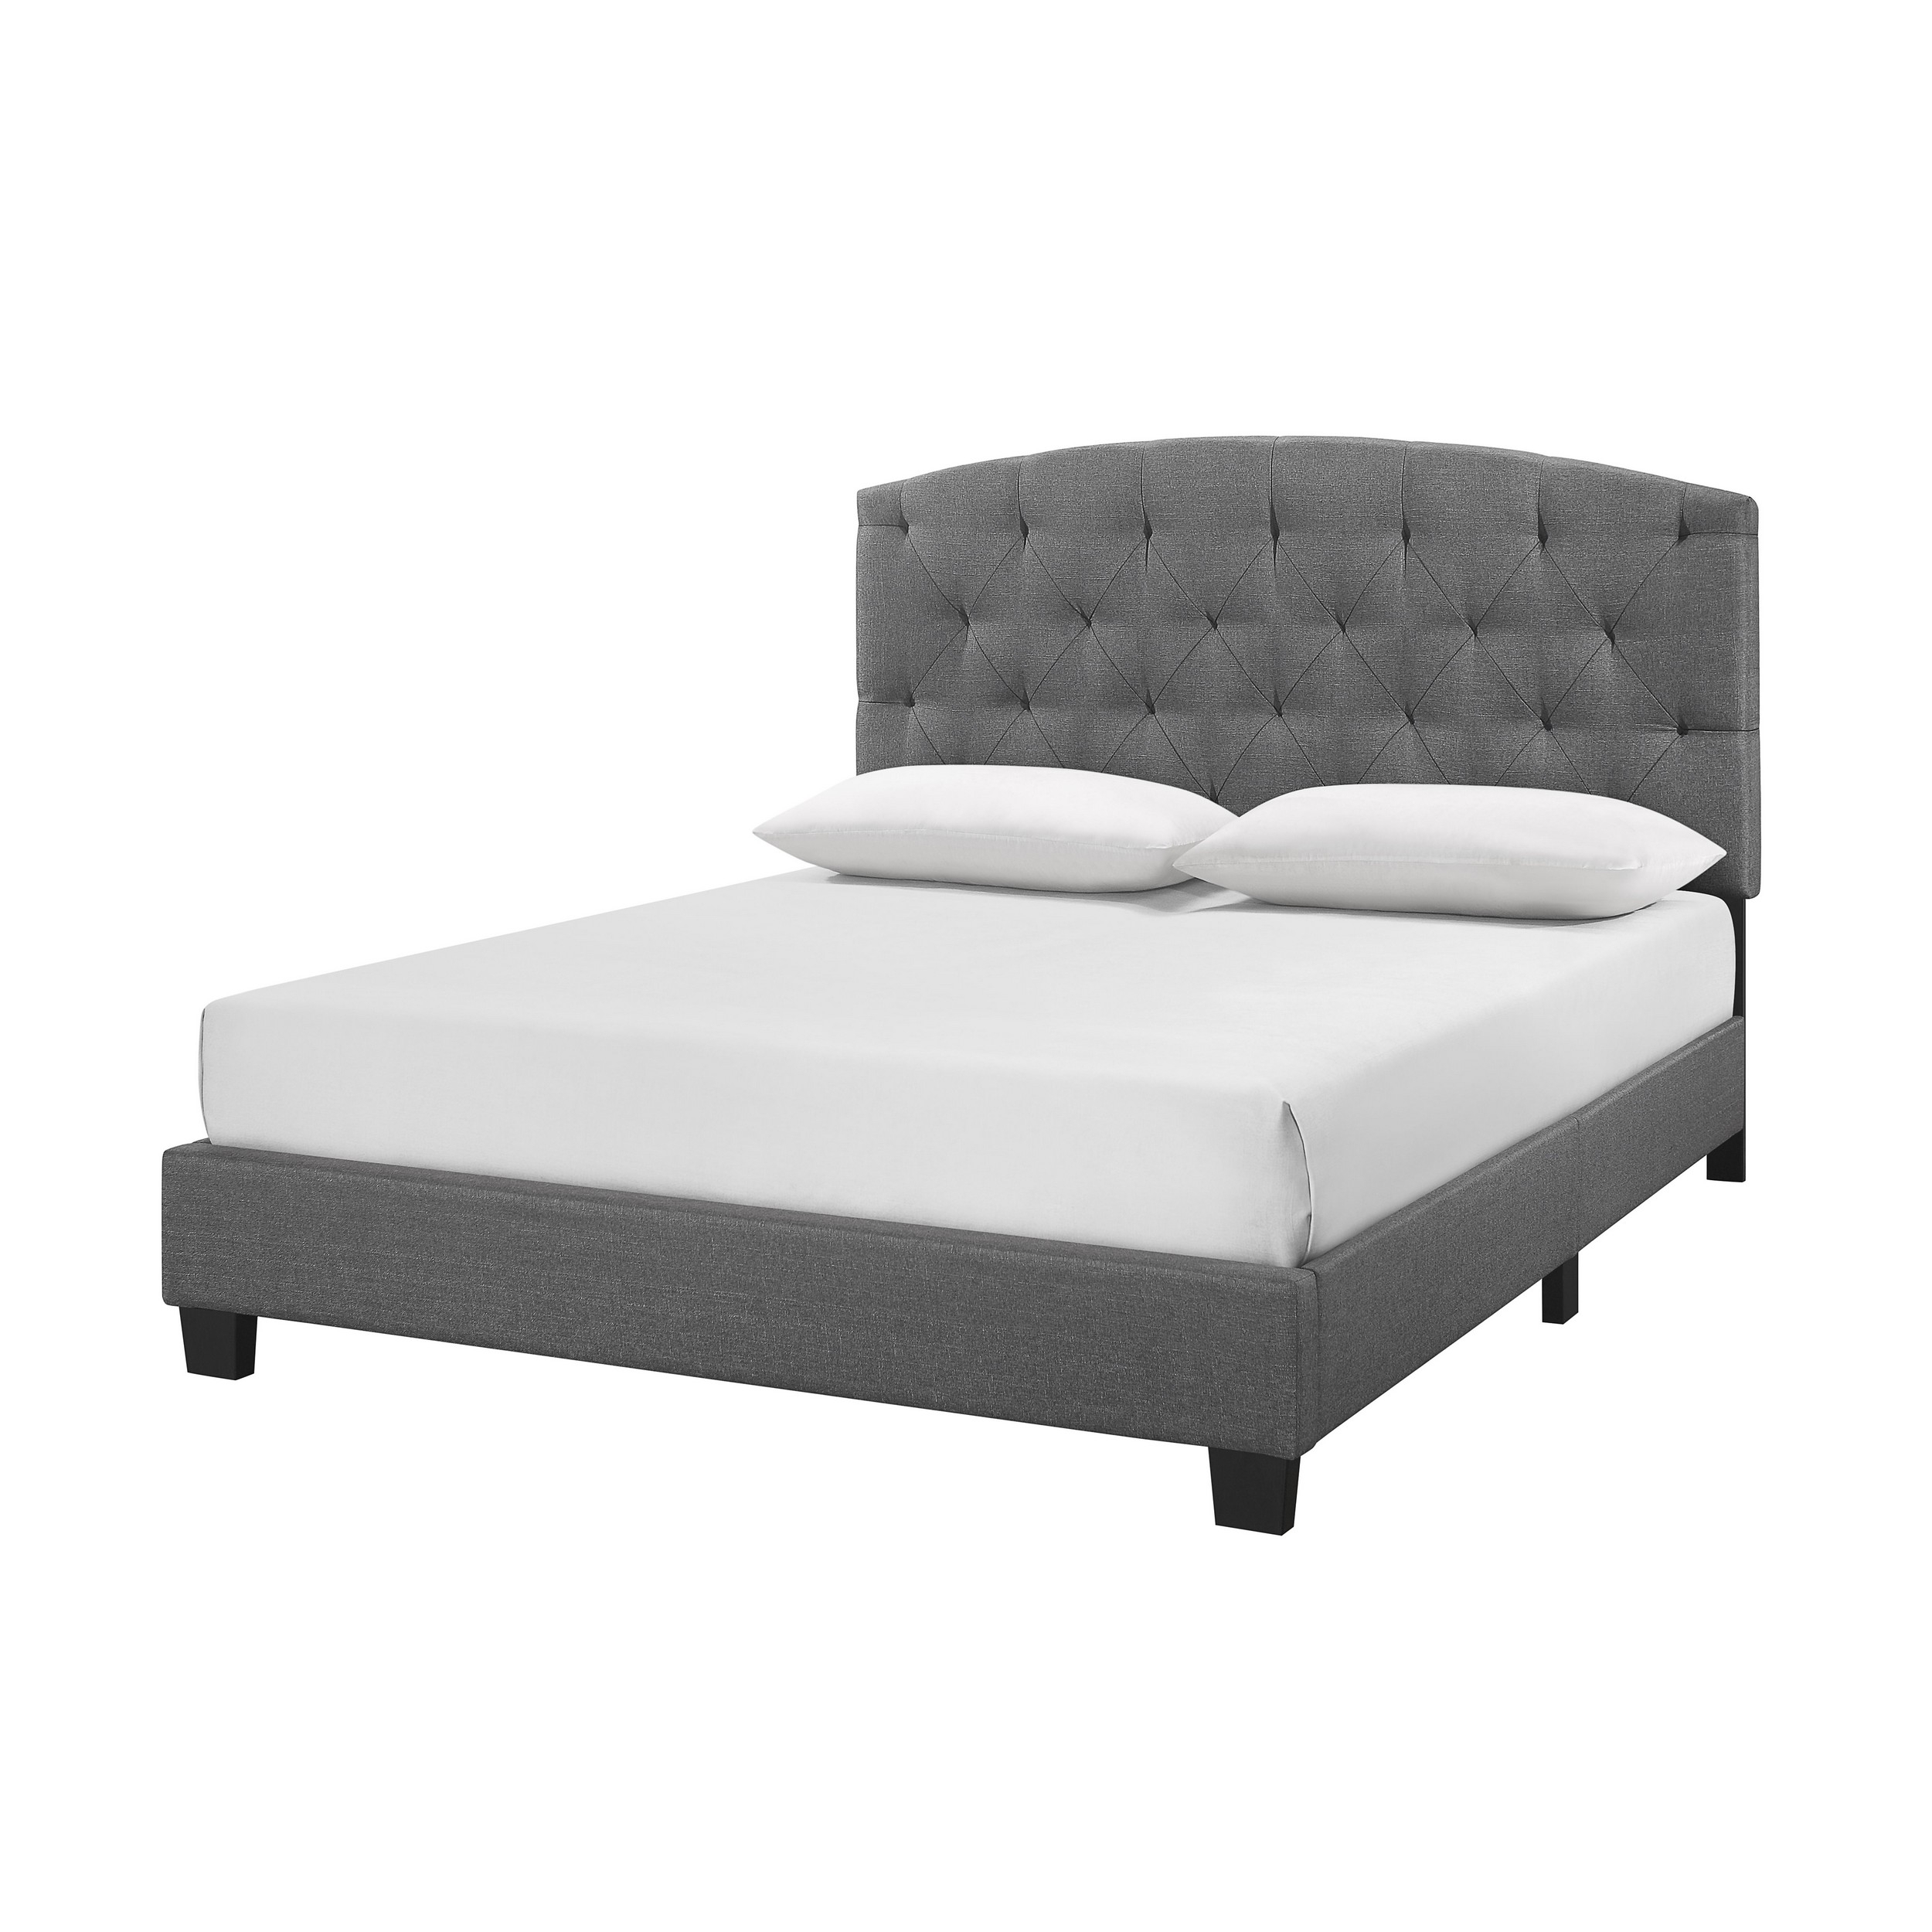 Dane Queen Size Bed, Fully Upholstered, Tufted Curved Headboard, Light Gray- Saltoro Sherpi